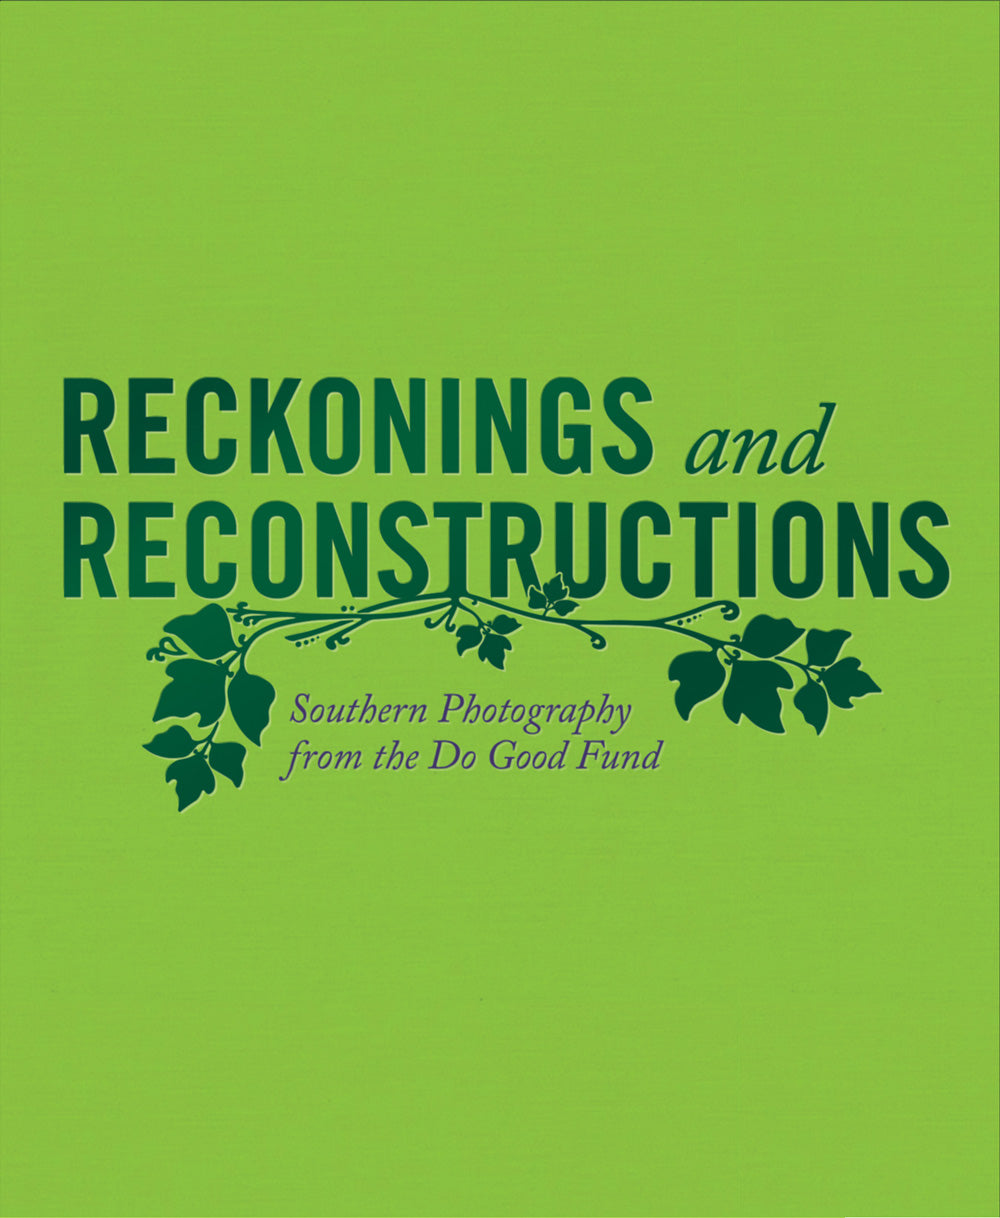 Reckonings and Reconstructions: Southern Photography from the Do Good Fund